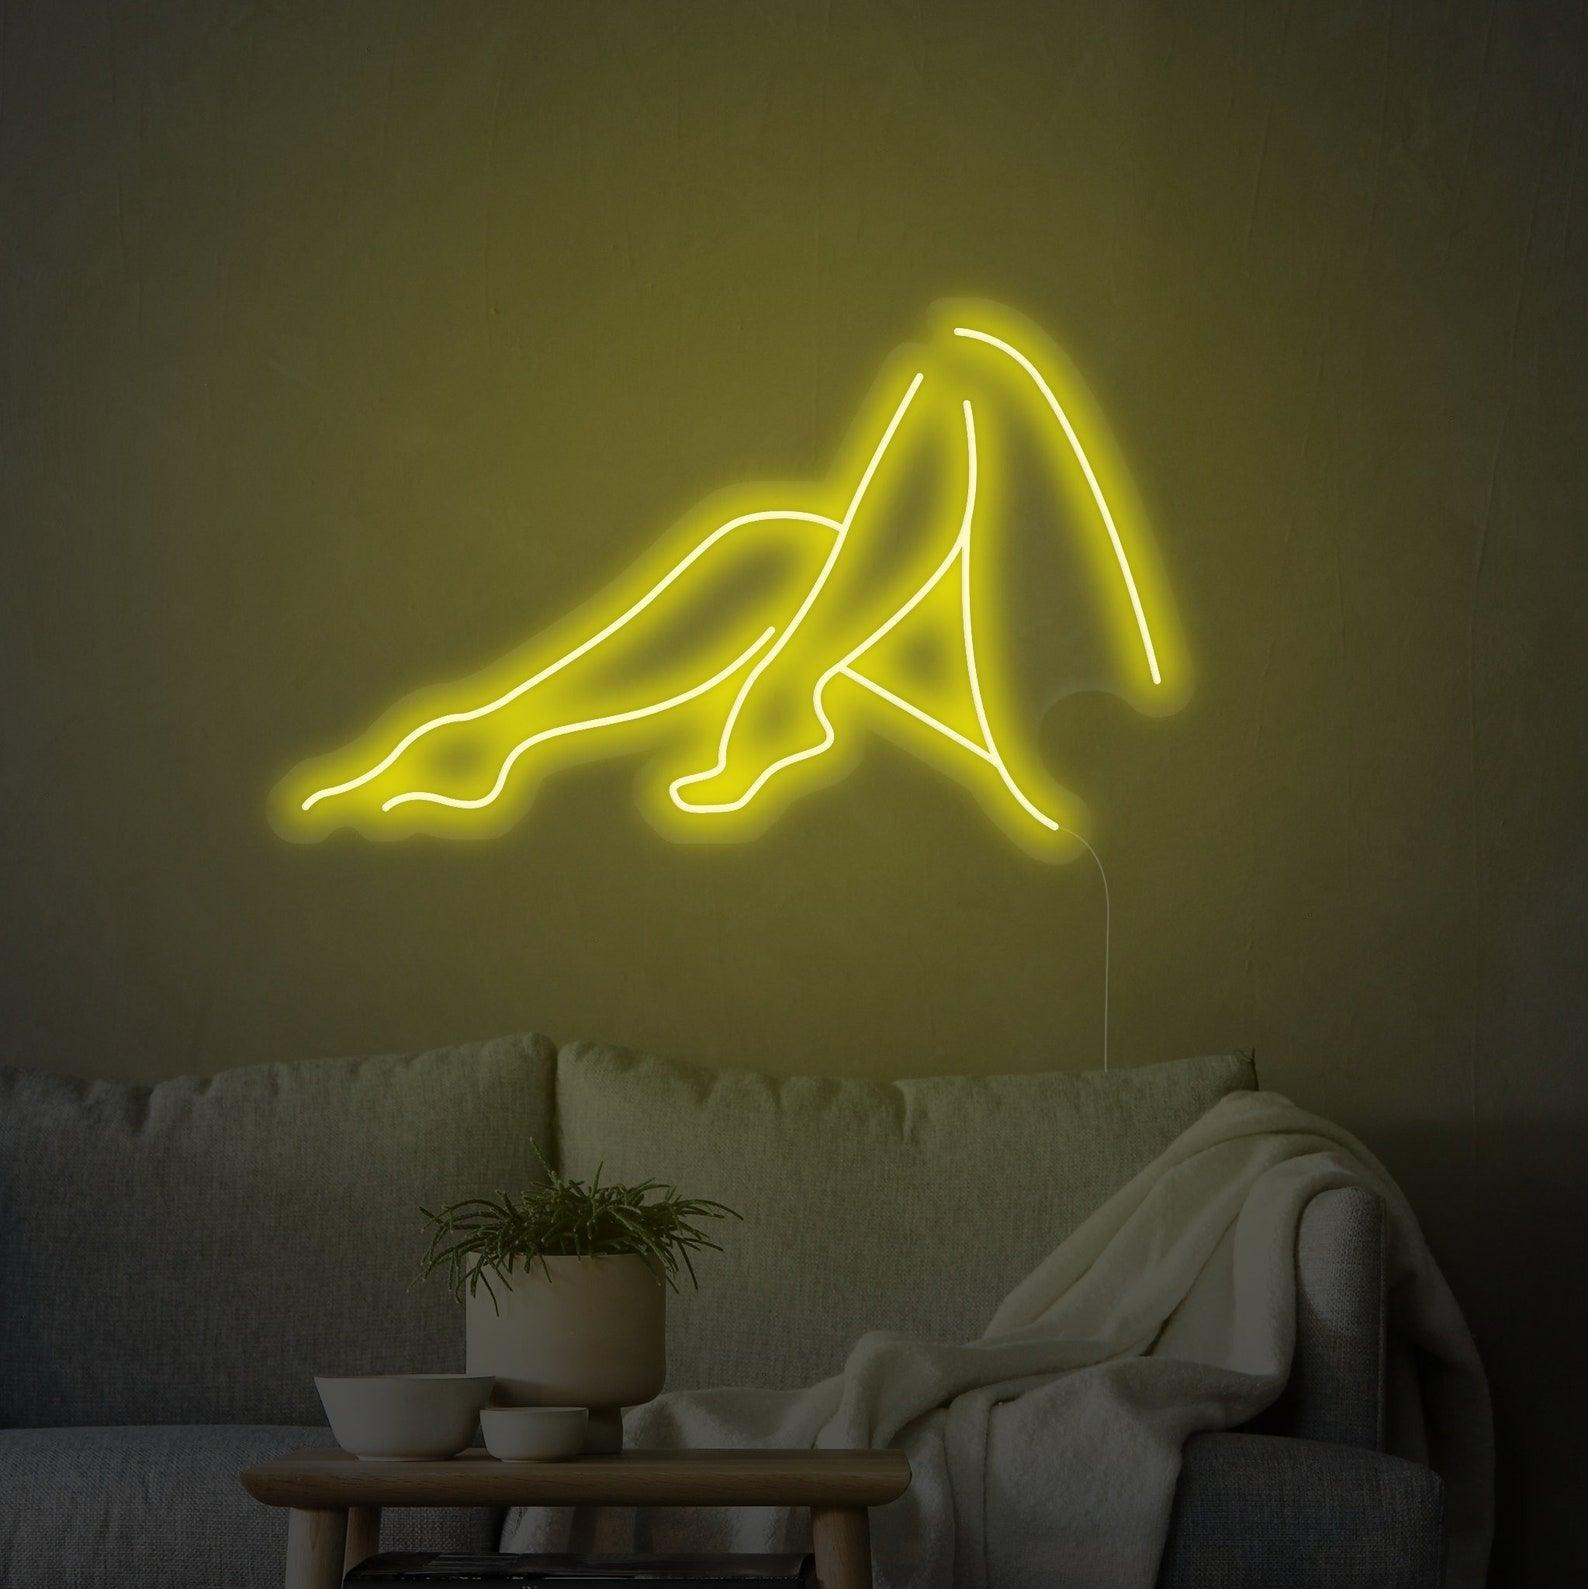 Legs for Days' LED Neon Sign